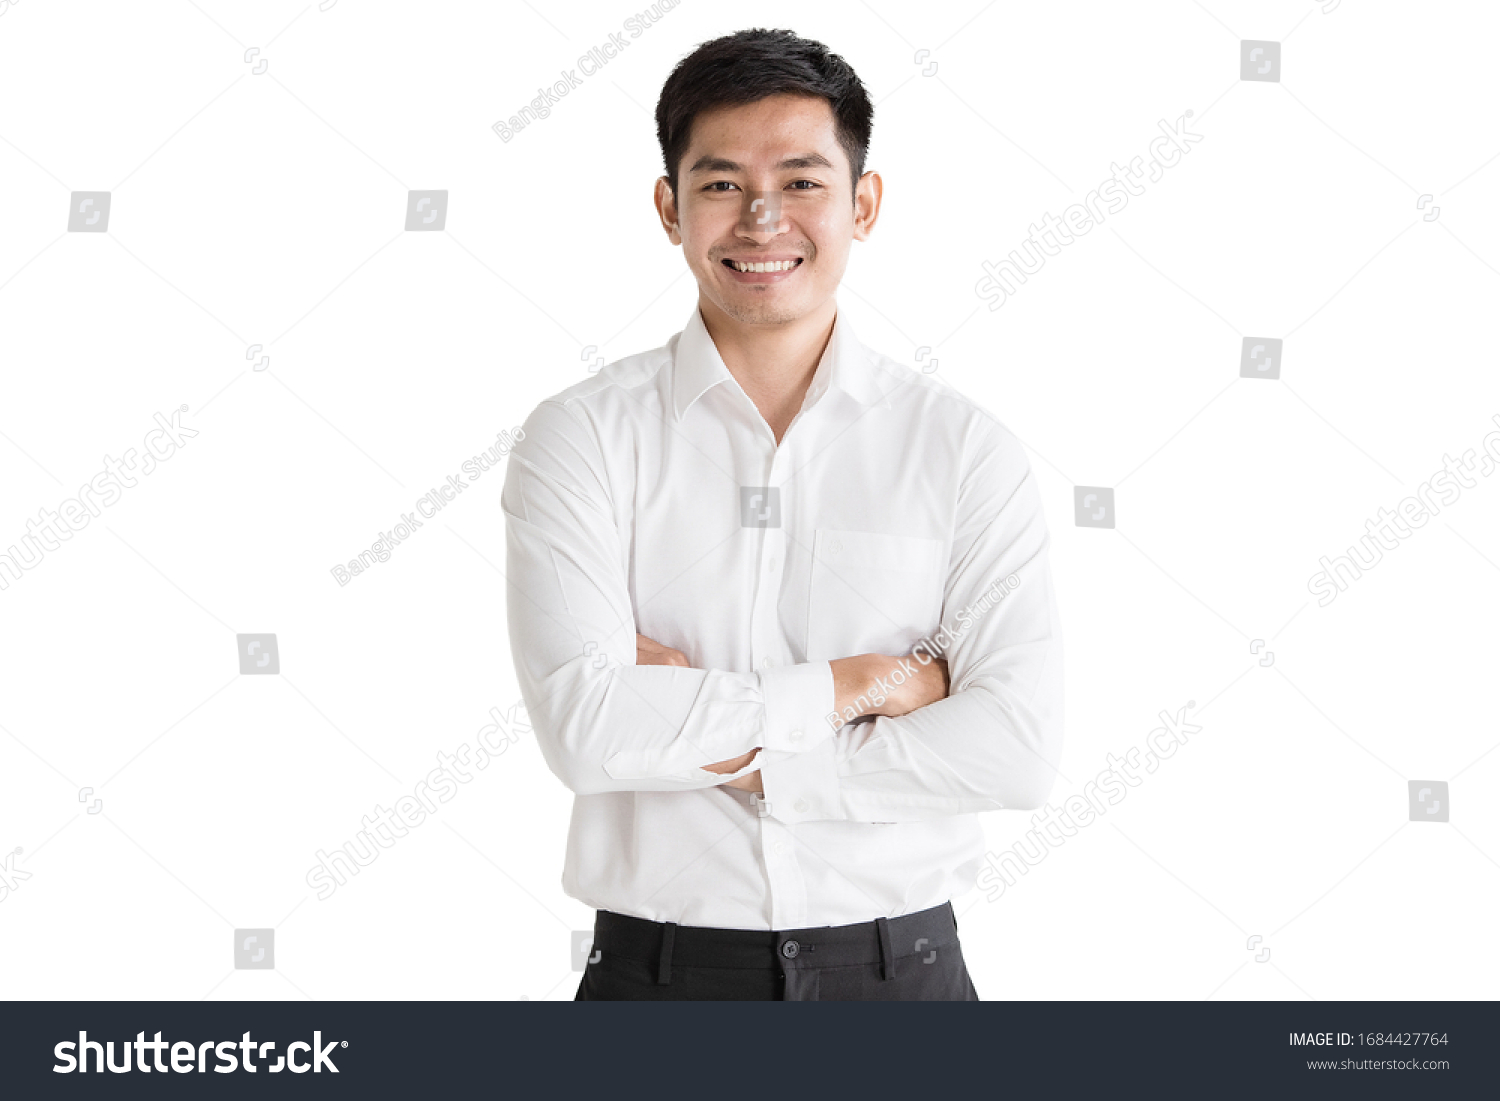 Young, handsome and friendly face man smile, dressed casually with happy and self-confident positive expression with crossed arms on white background studio shot. Concept for good attitude boy. #1684427764